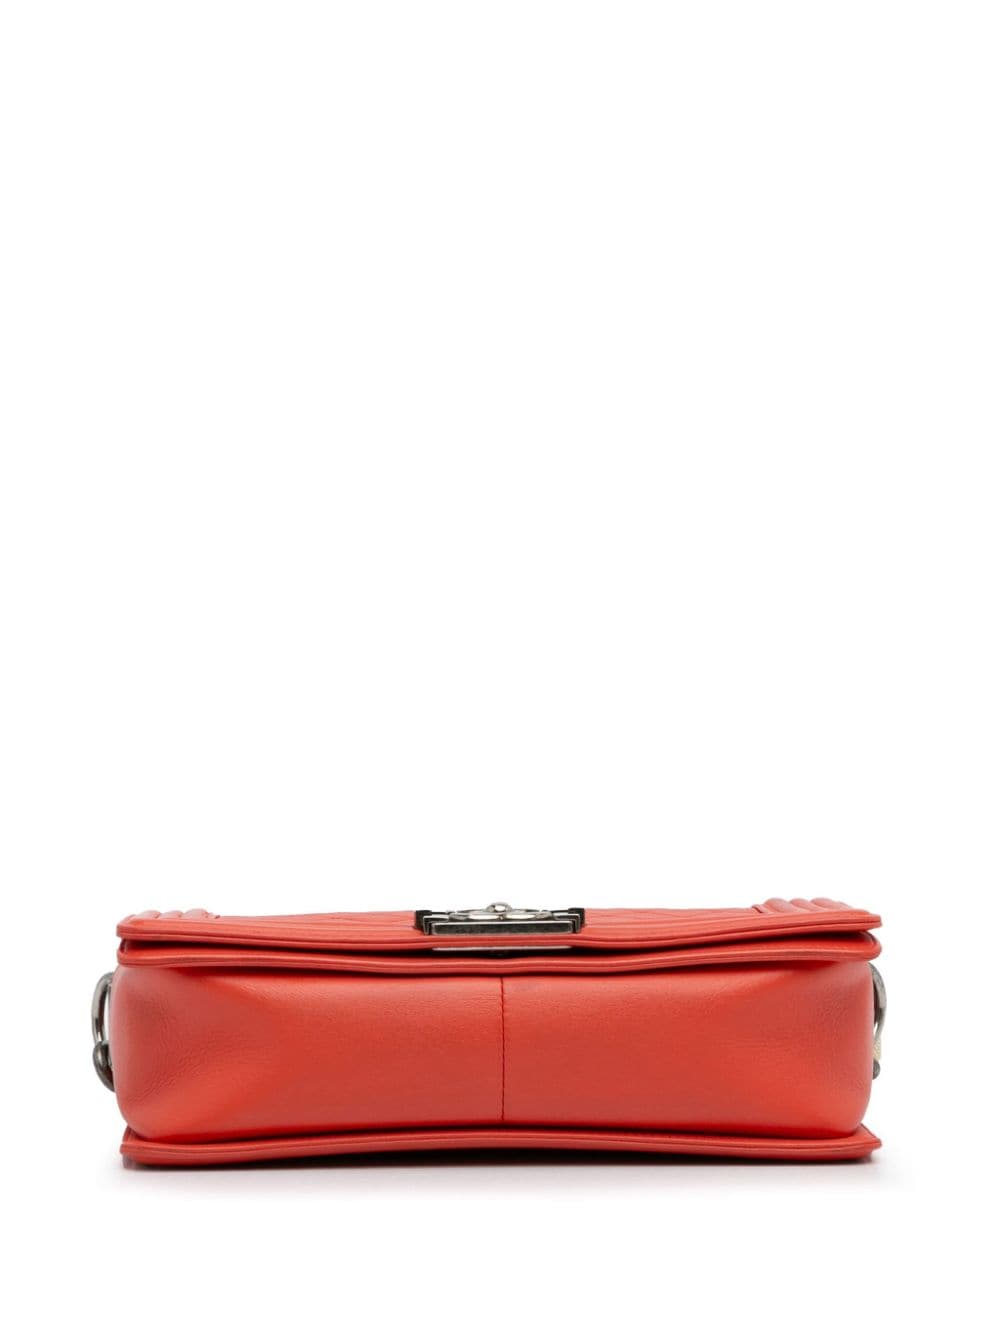 Pre-owned Chanel Medium Lambskin Boy Galuchat Strap Flap 斜挎包（2012年典藏款） In Red